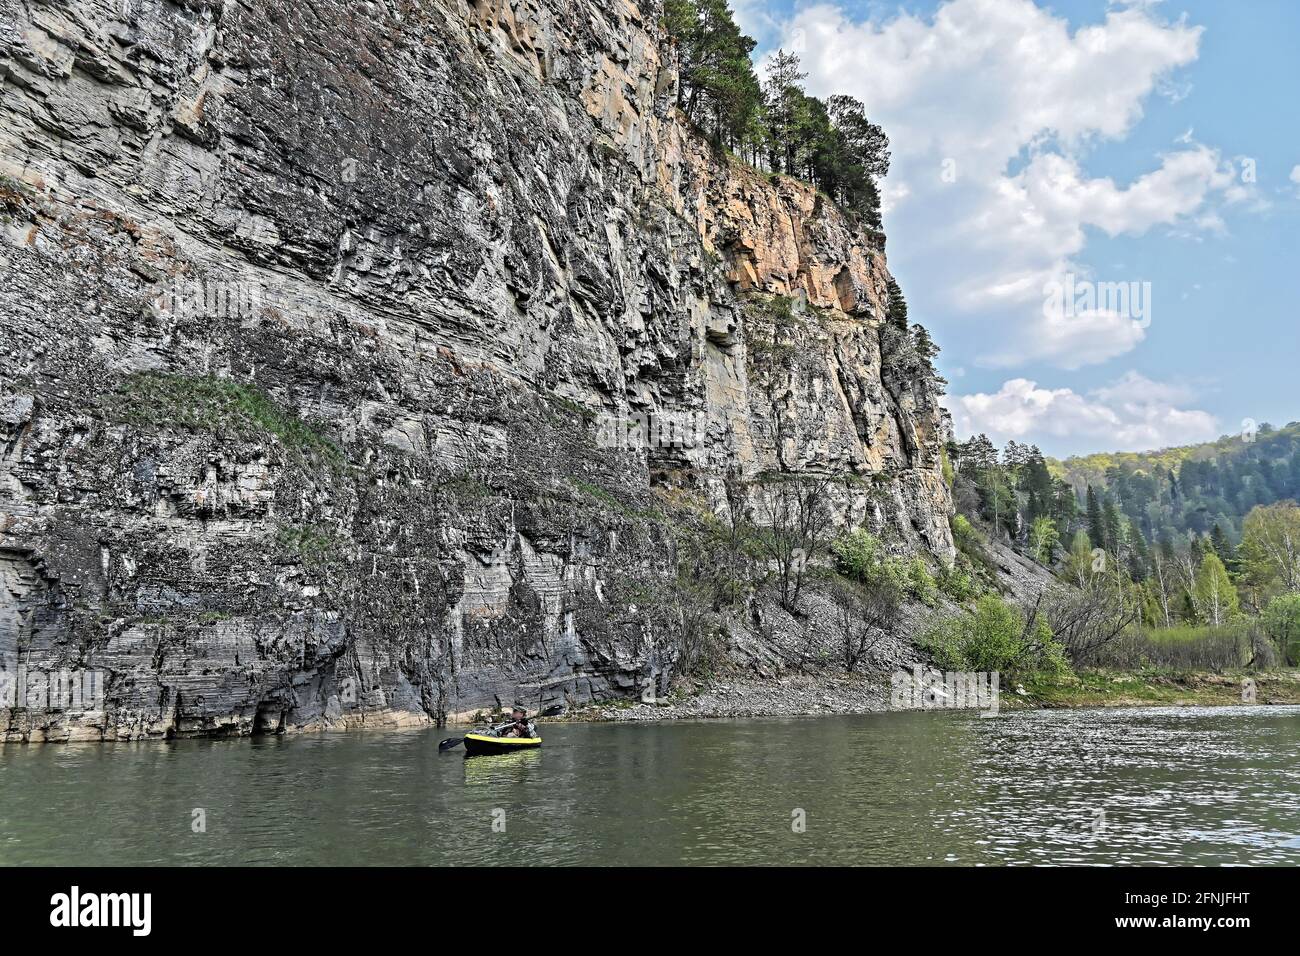 Rocks on the banks of the Zilim river. Spring in the natural park Zilim, Republic of Bashkortostan, Russia. Stock Photo